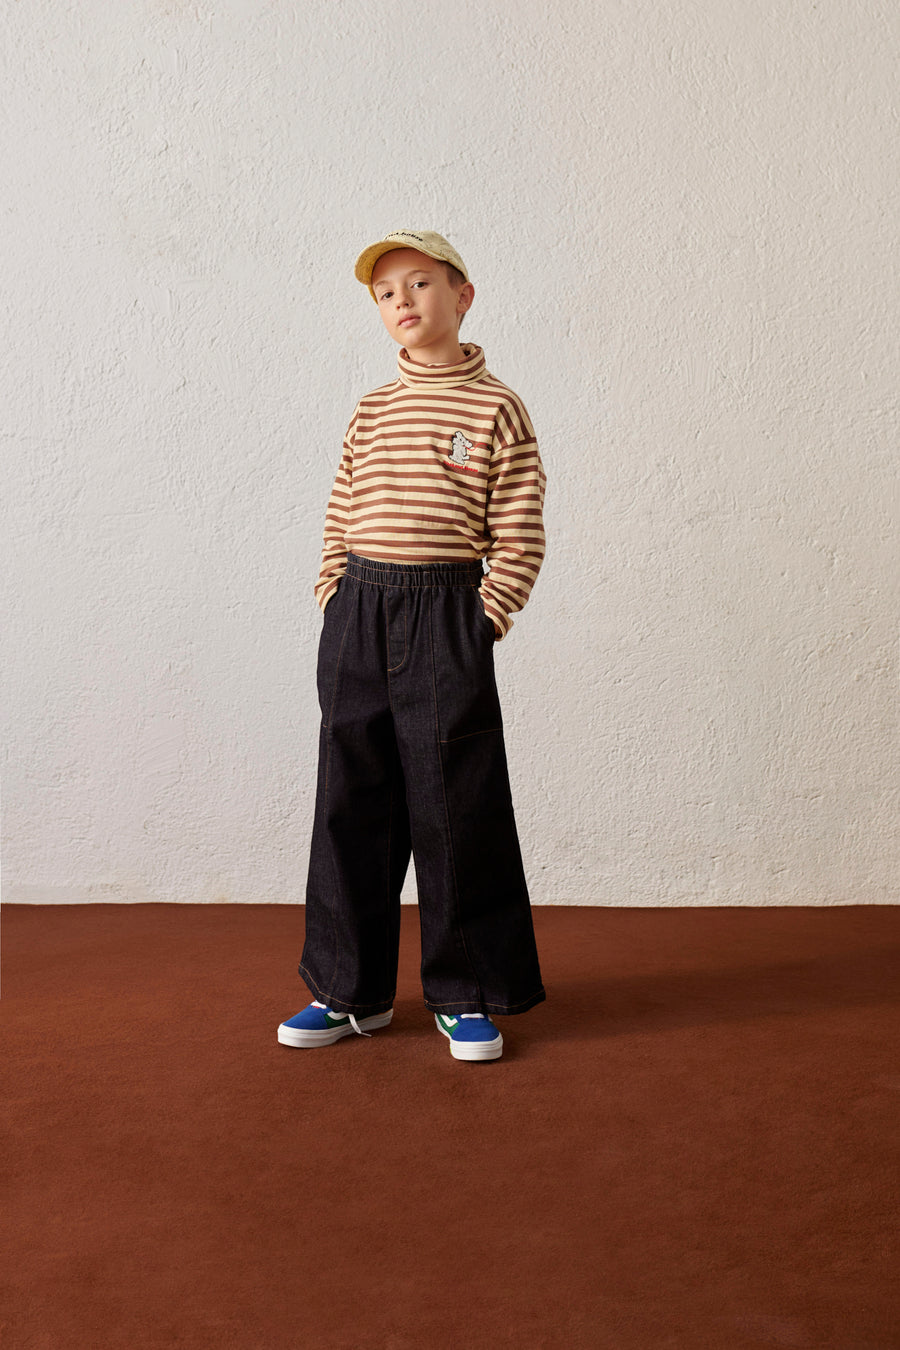 Weekend house kids - dogs stripes turtle neck - sand